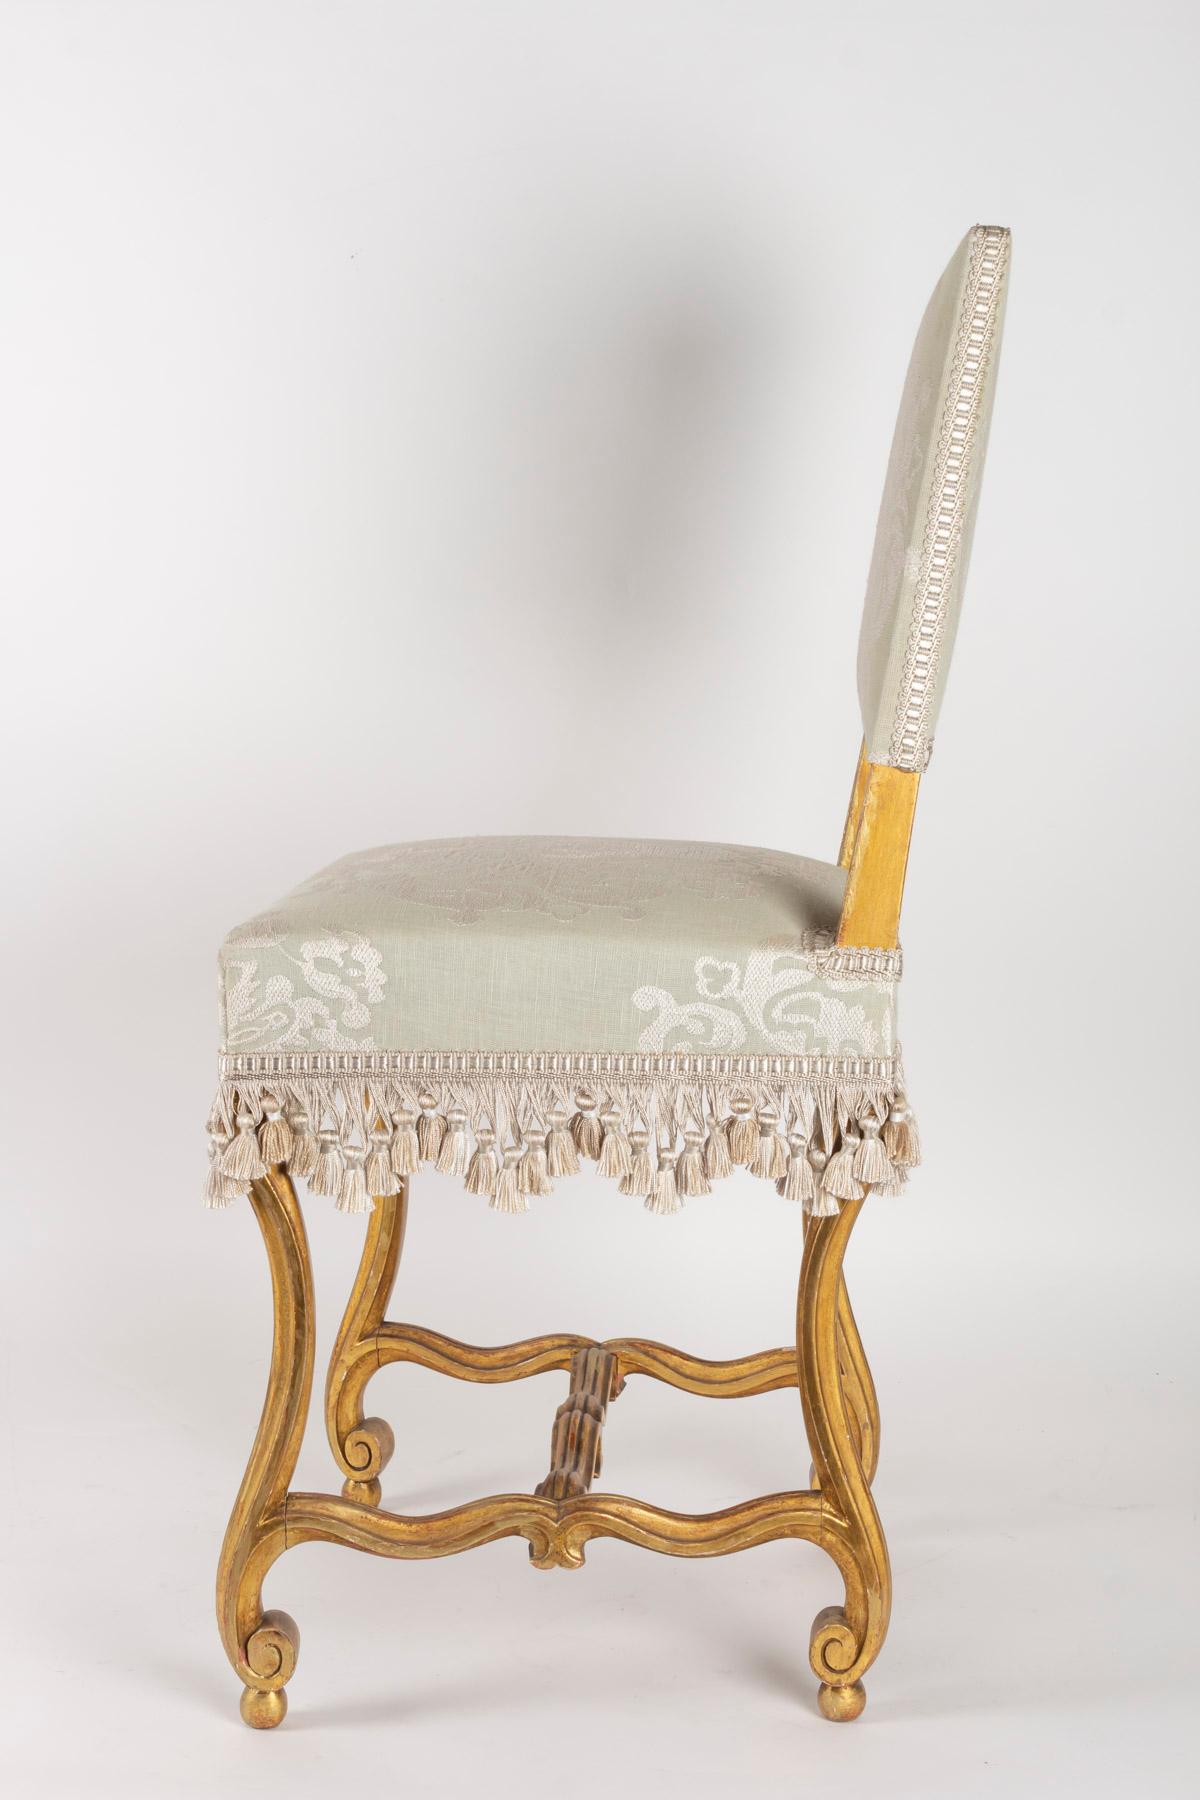 Pair of Chairs, Sheep Bones, Carved and Gilded Wooden, Napoleon III Period 4